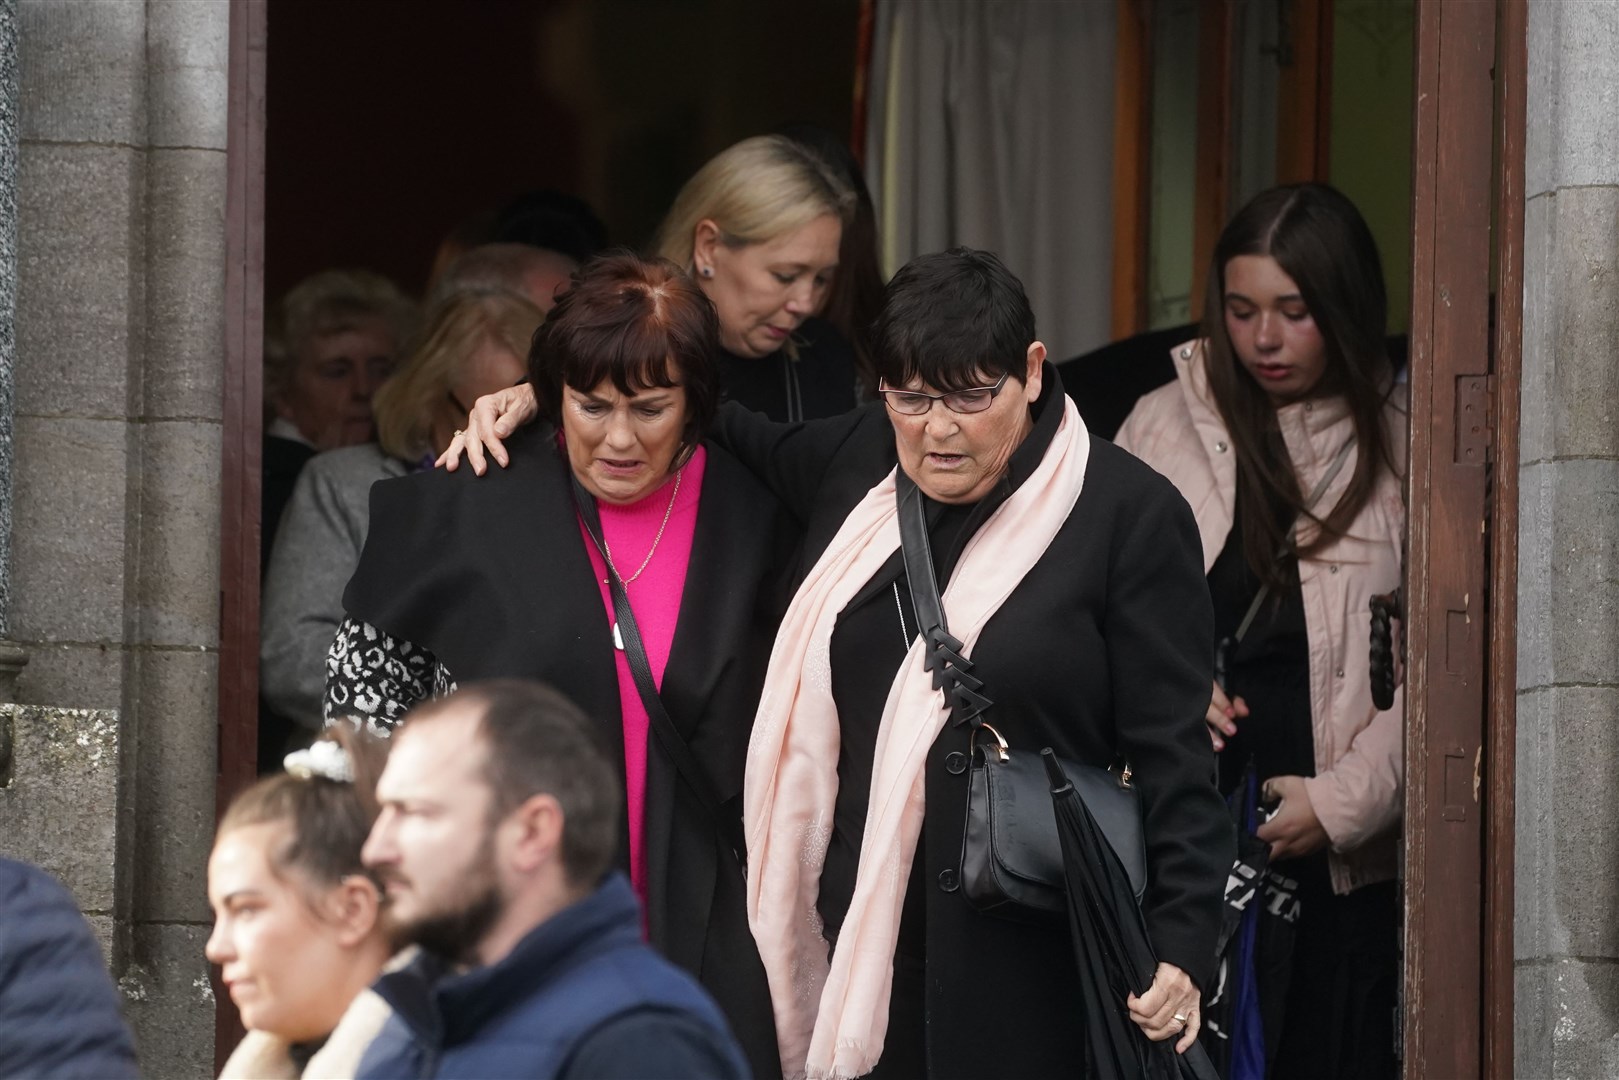 Mourners leave the church after the service (Brian Lawless/PA)